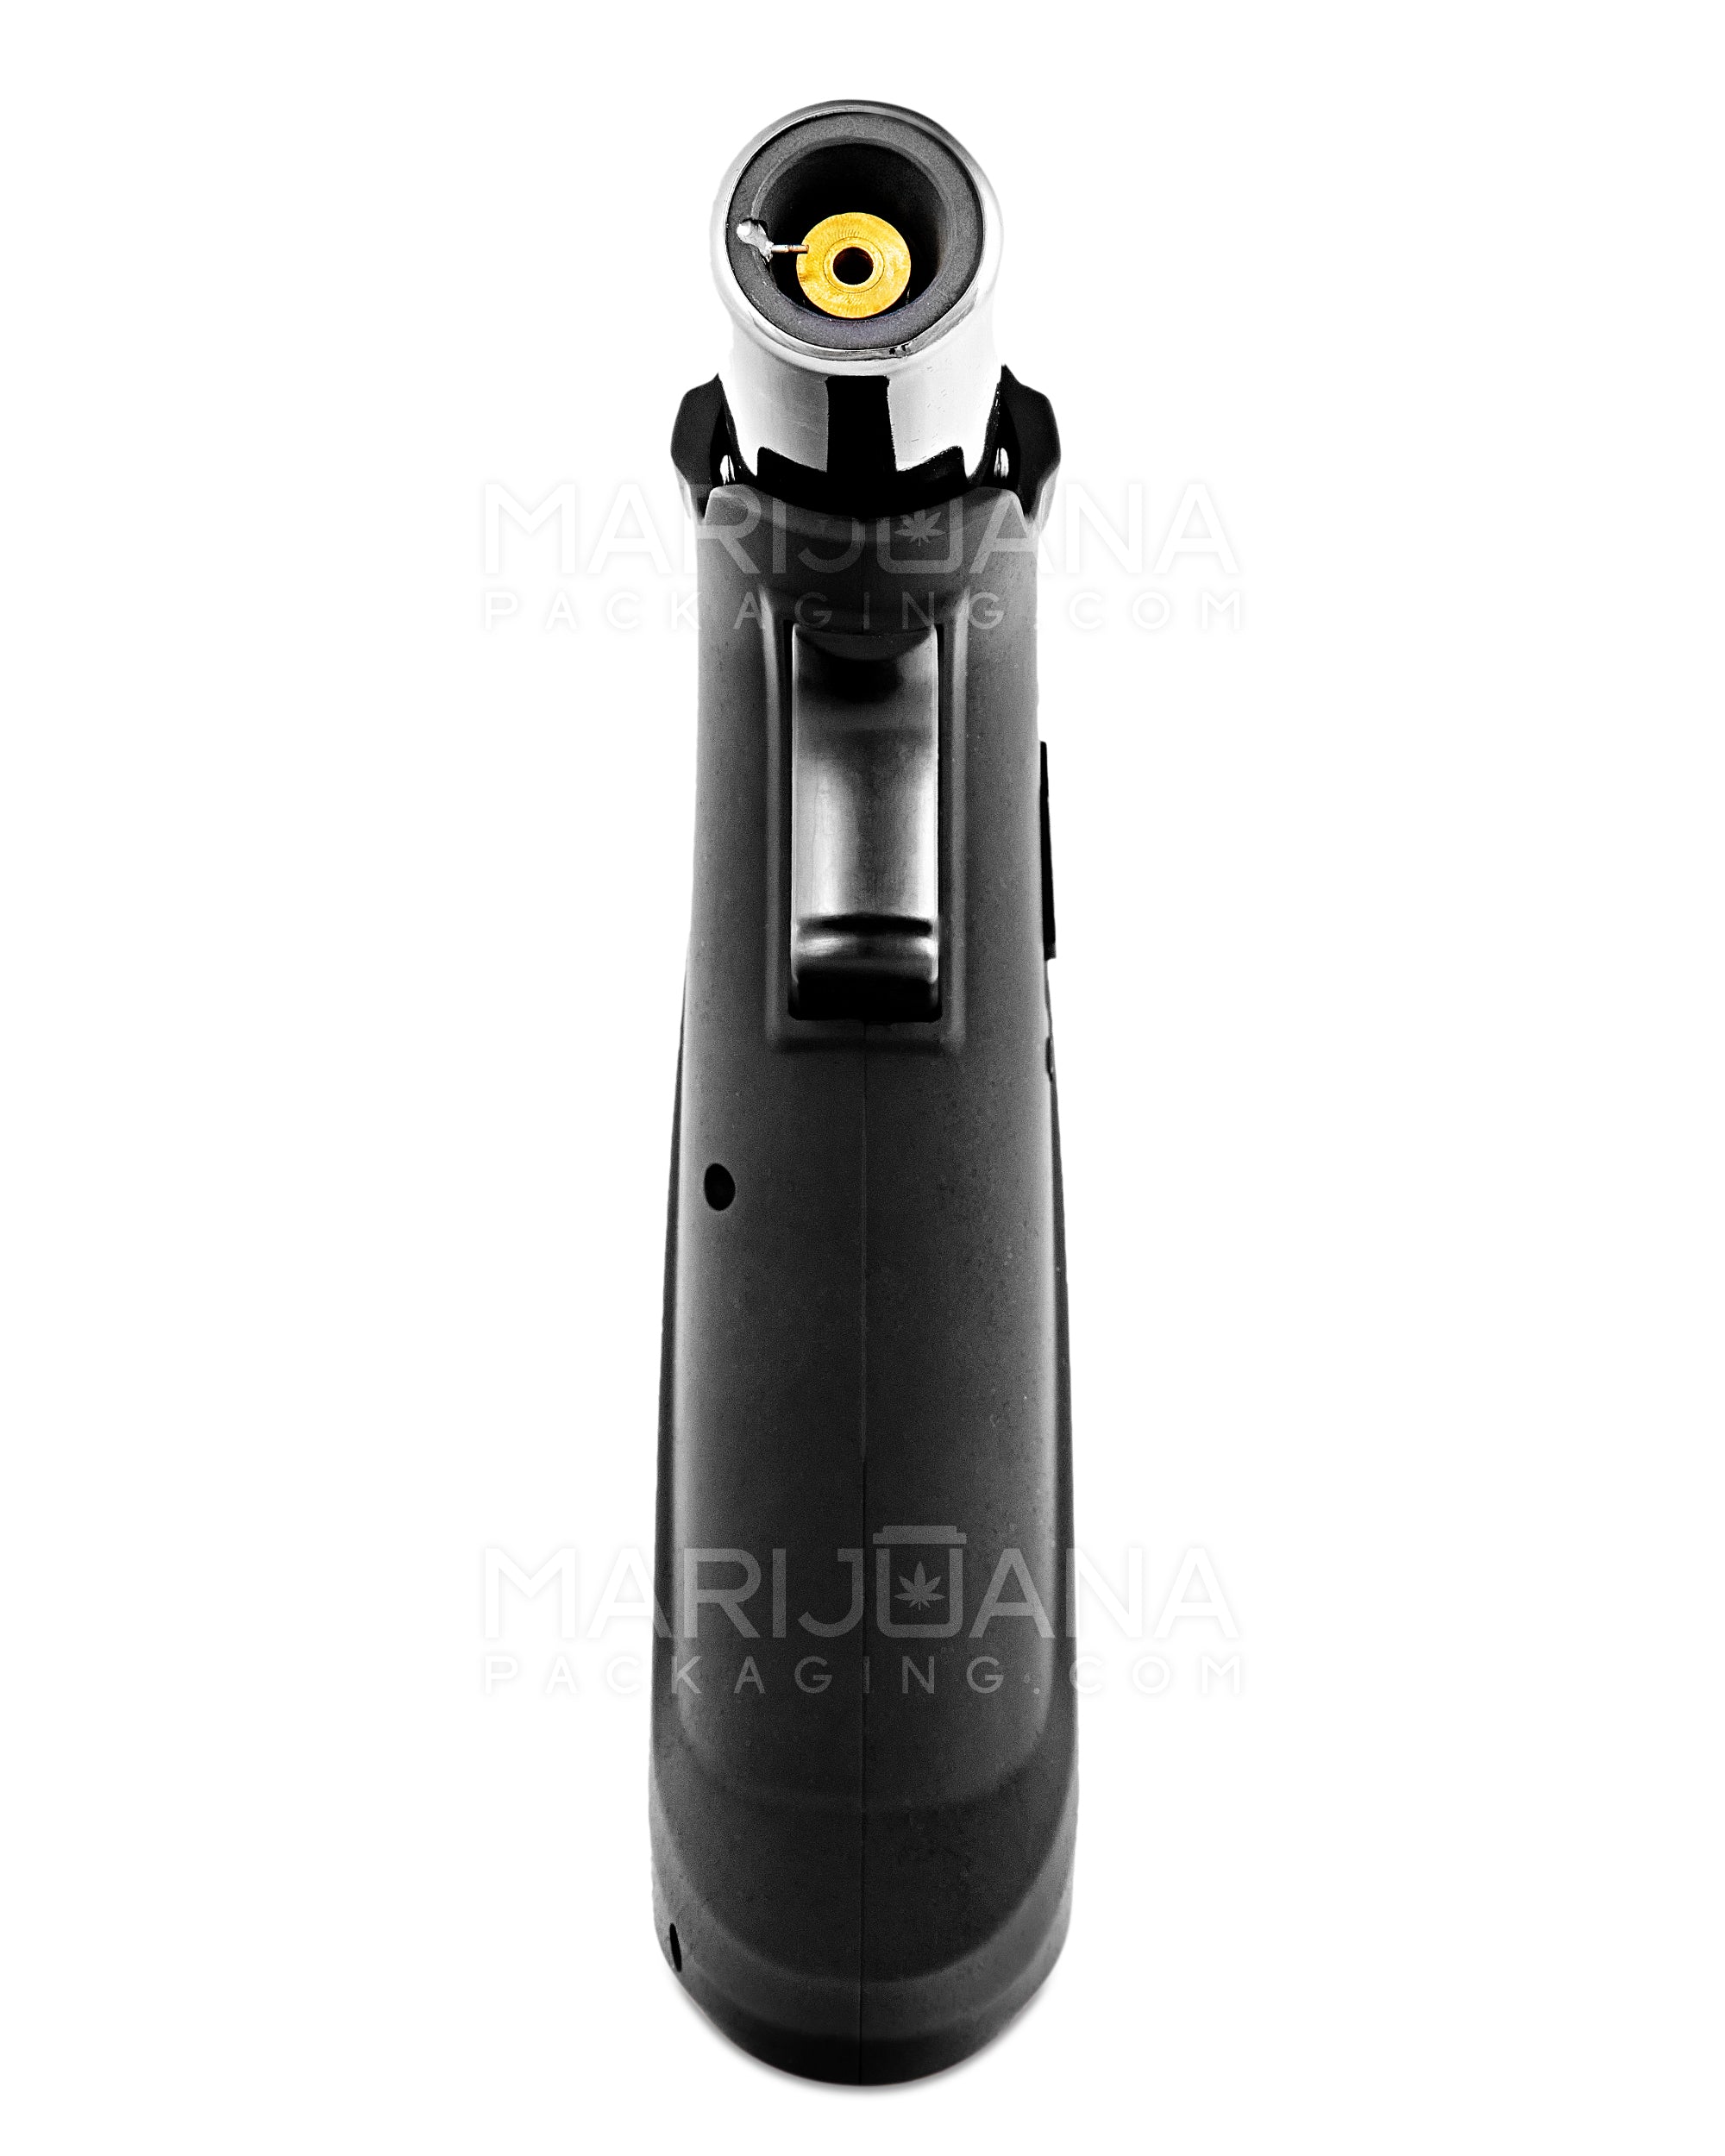 TECHNO | High Angle Metal Torch w/ Safety Lock | 6.5in Tall - Butane - Black - 3